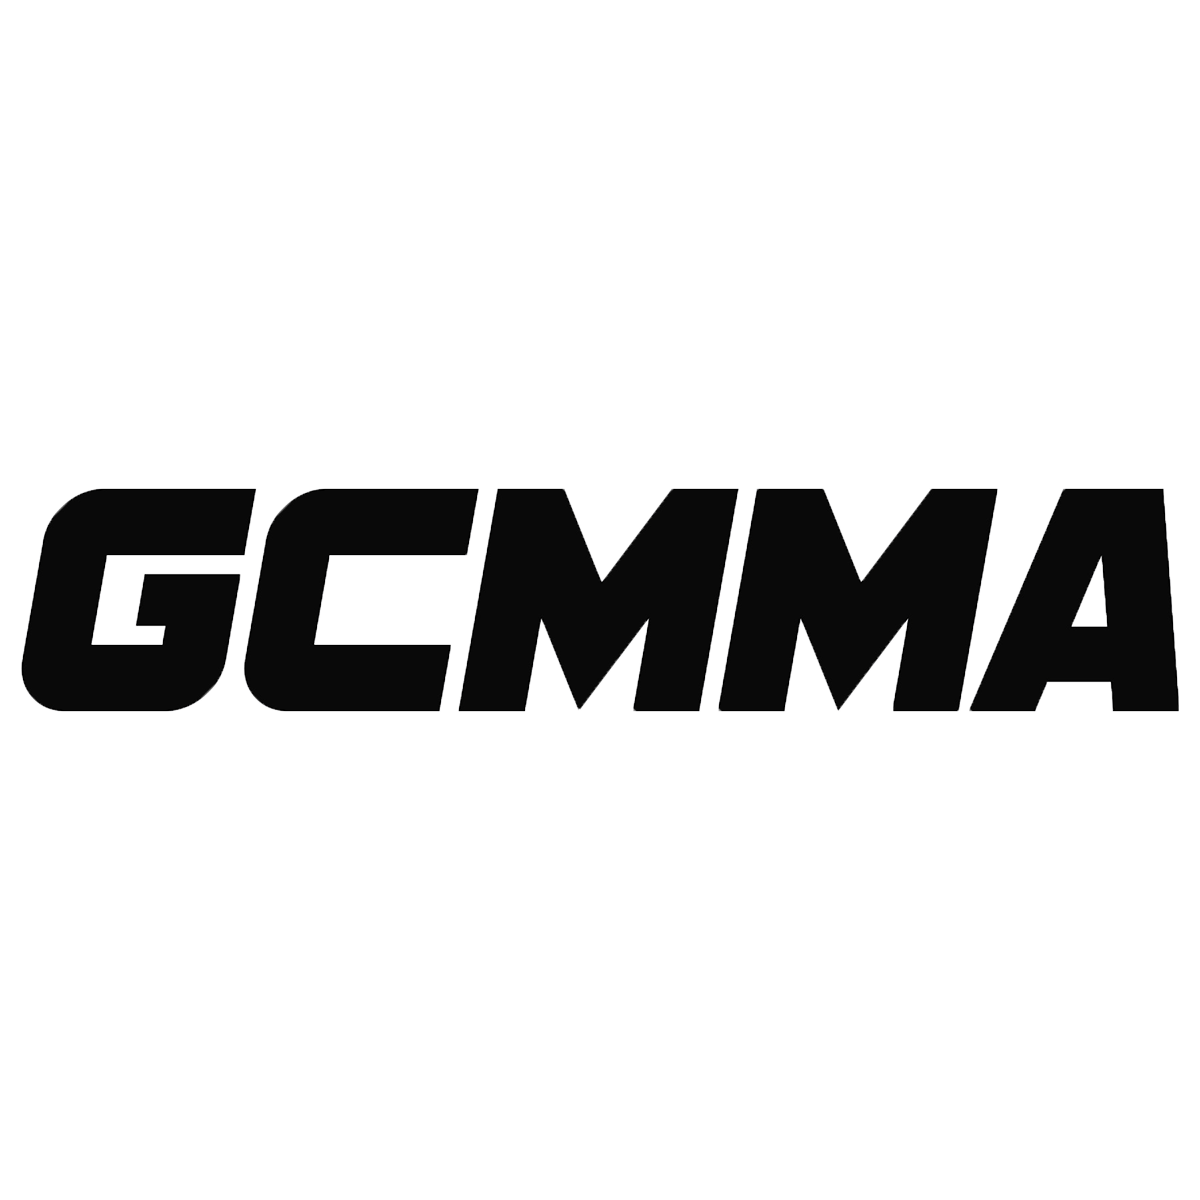 Combat Sports Now is the official PPV Home of Gulf Coast Mixed Martial Arts